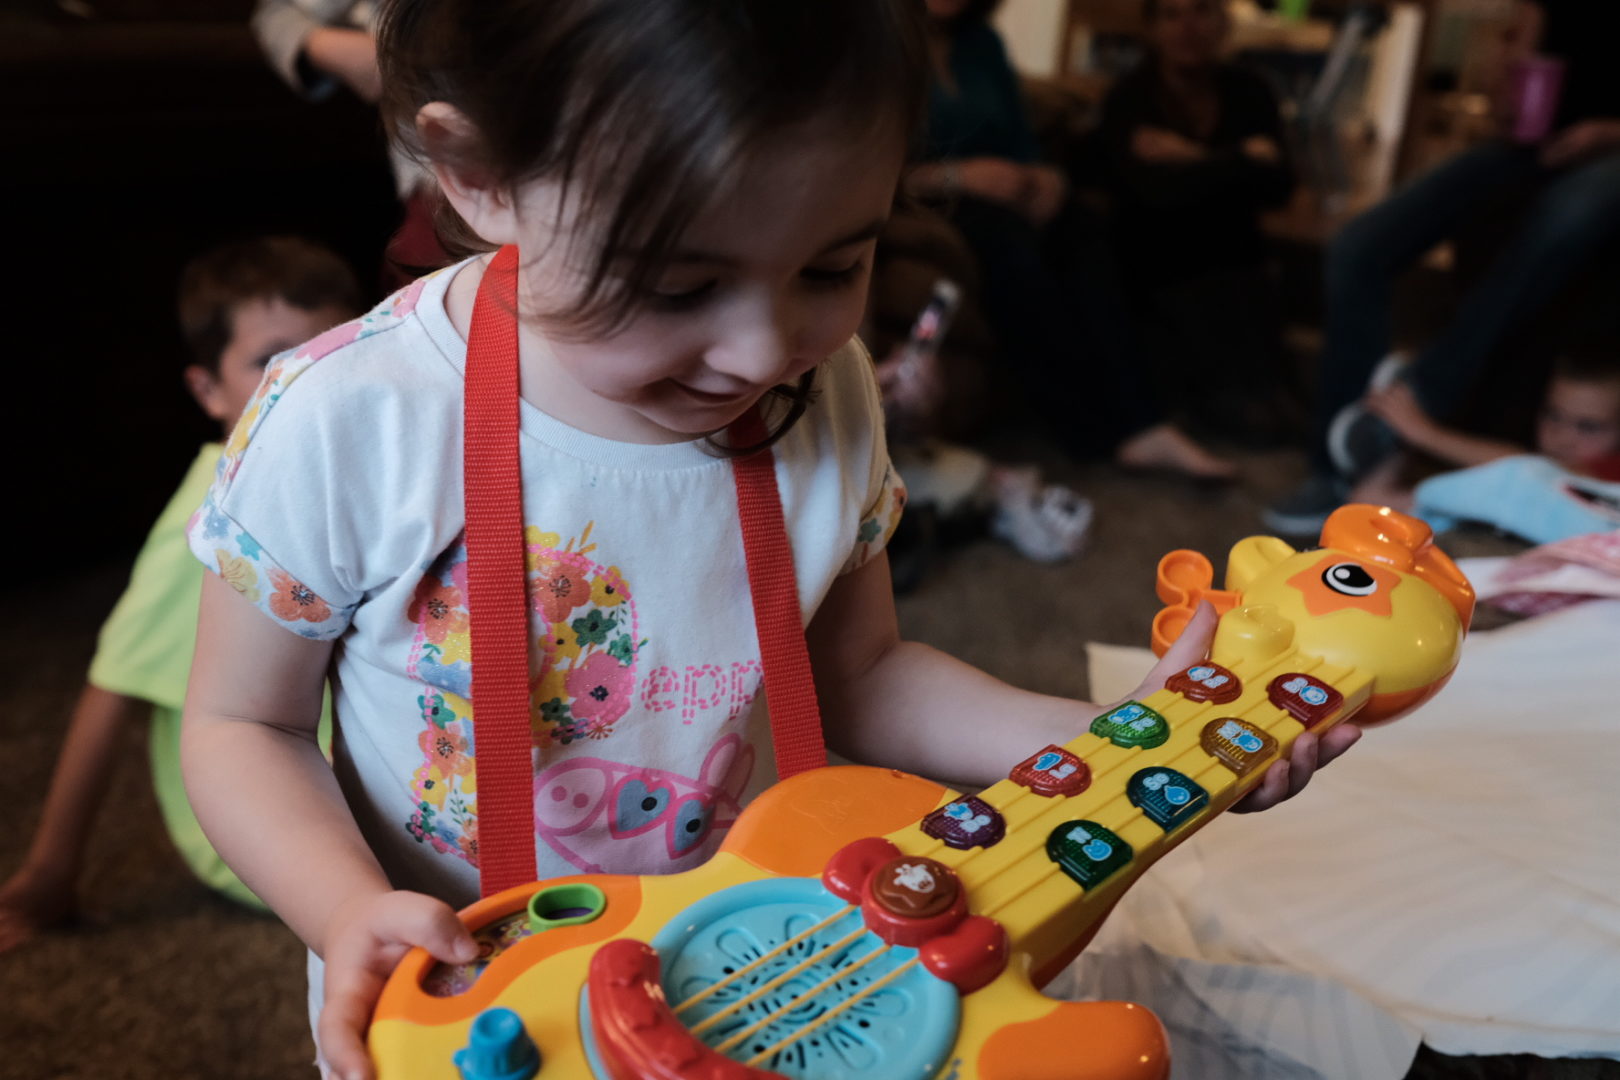 A little girl holds her toy guitar on her birthday